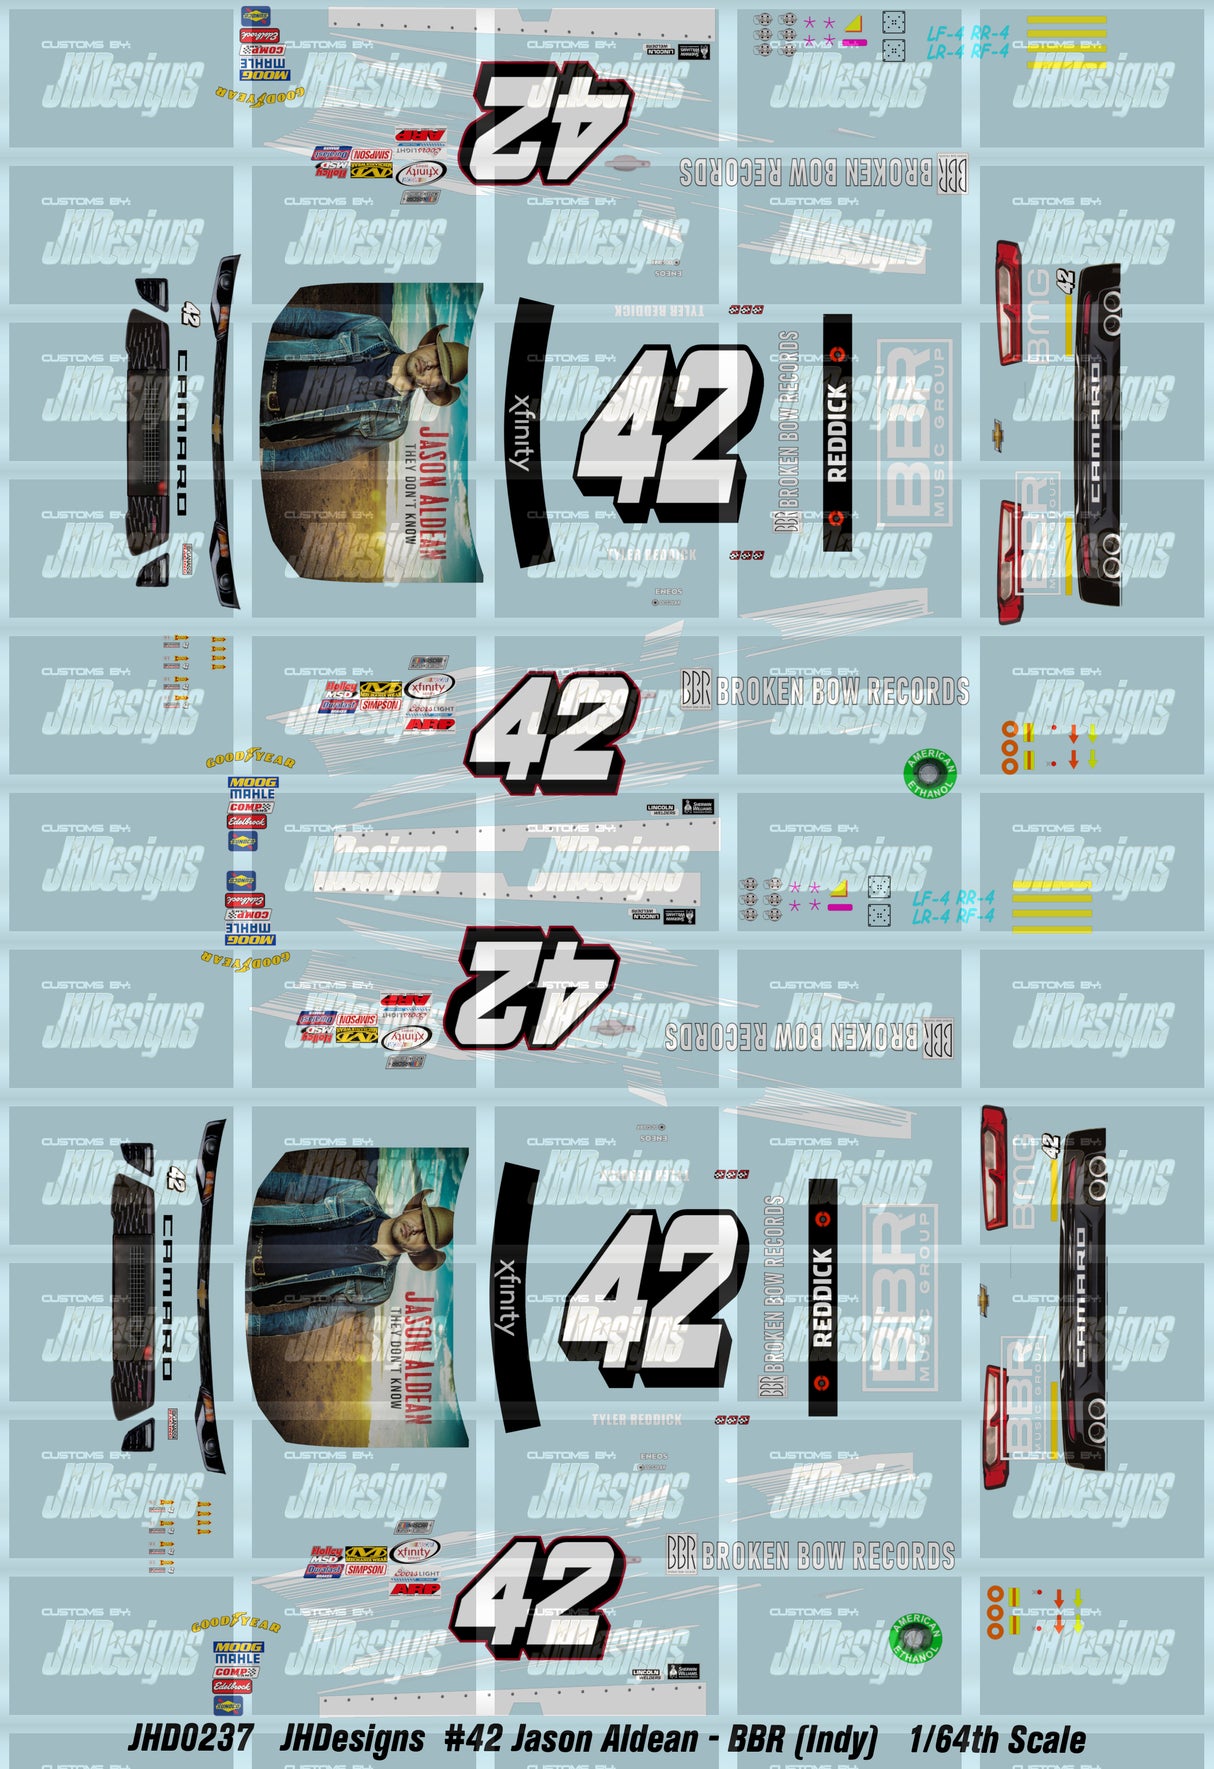 JH Designs Tyler Reddick 2017 NXS #42 Jason Aldean - They Don't Know (Indy Race) 1:64 Racecar Decal Set